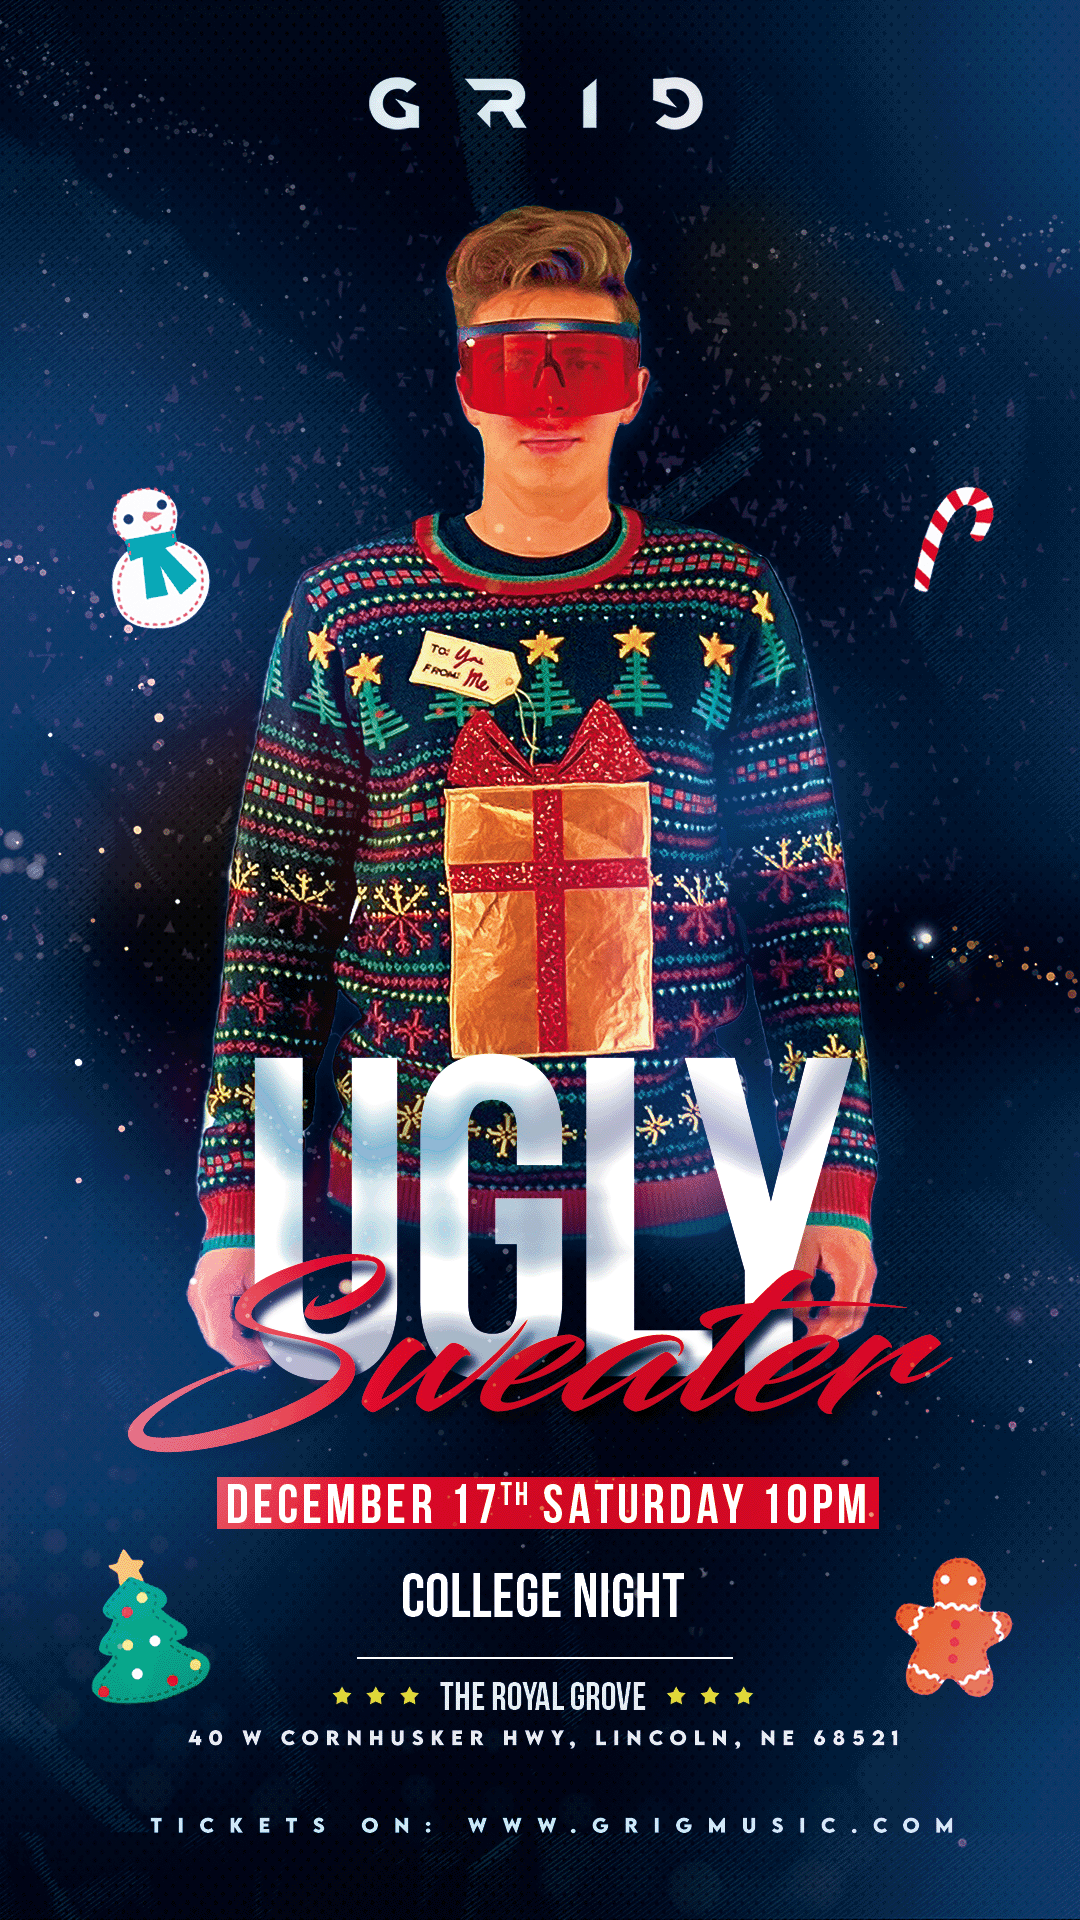 UGLY SWEATER THE ROYAL GROVE